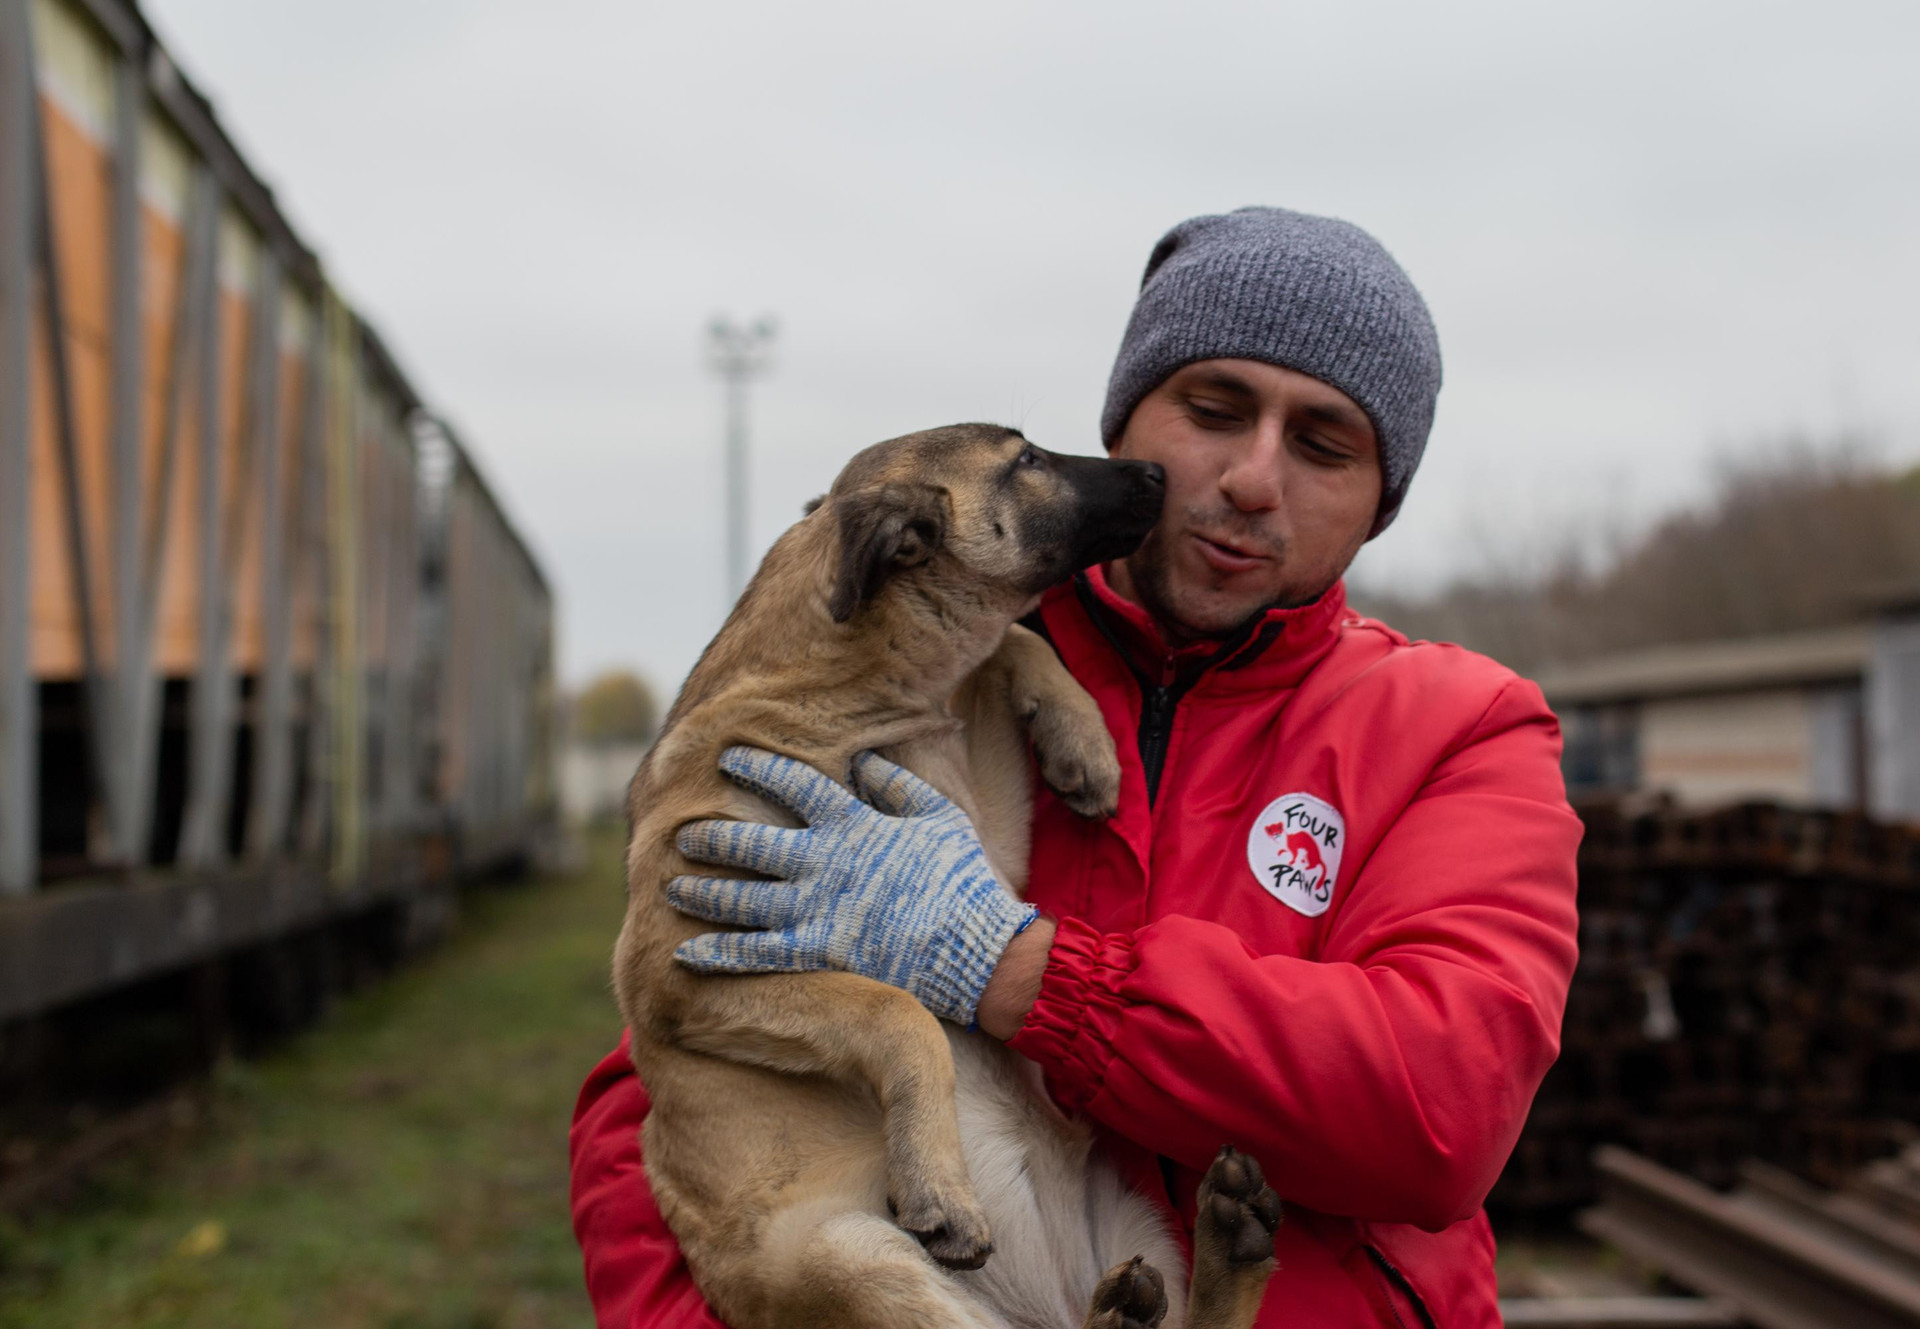 FOUR PAWS staff rescuing stray dog in Ukraine